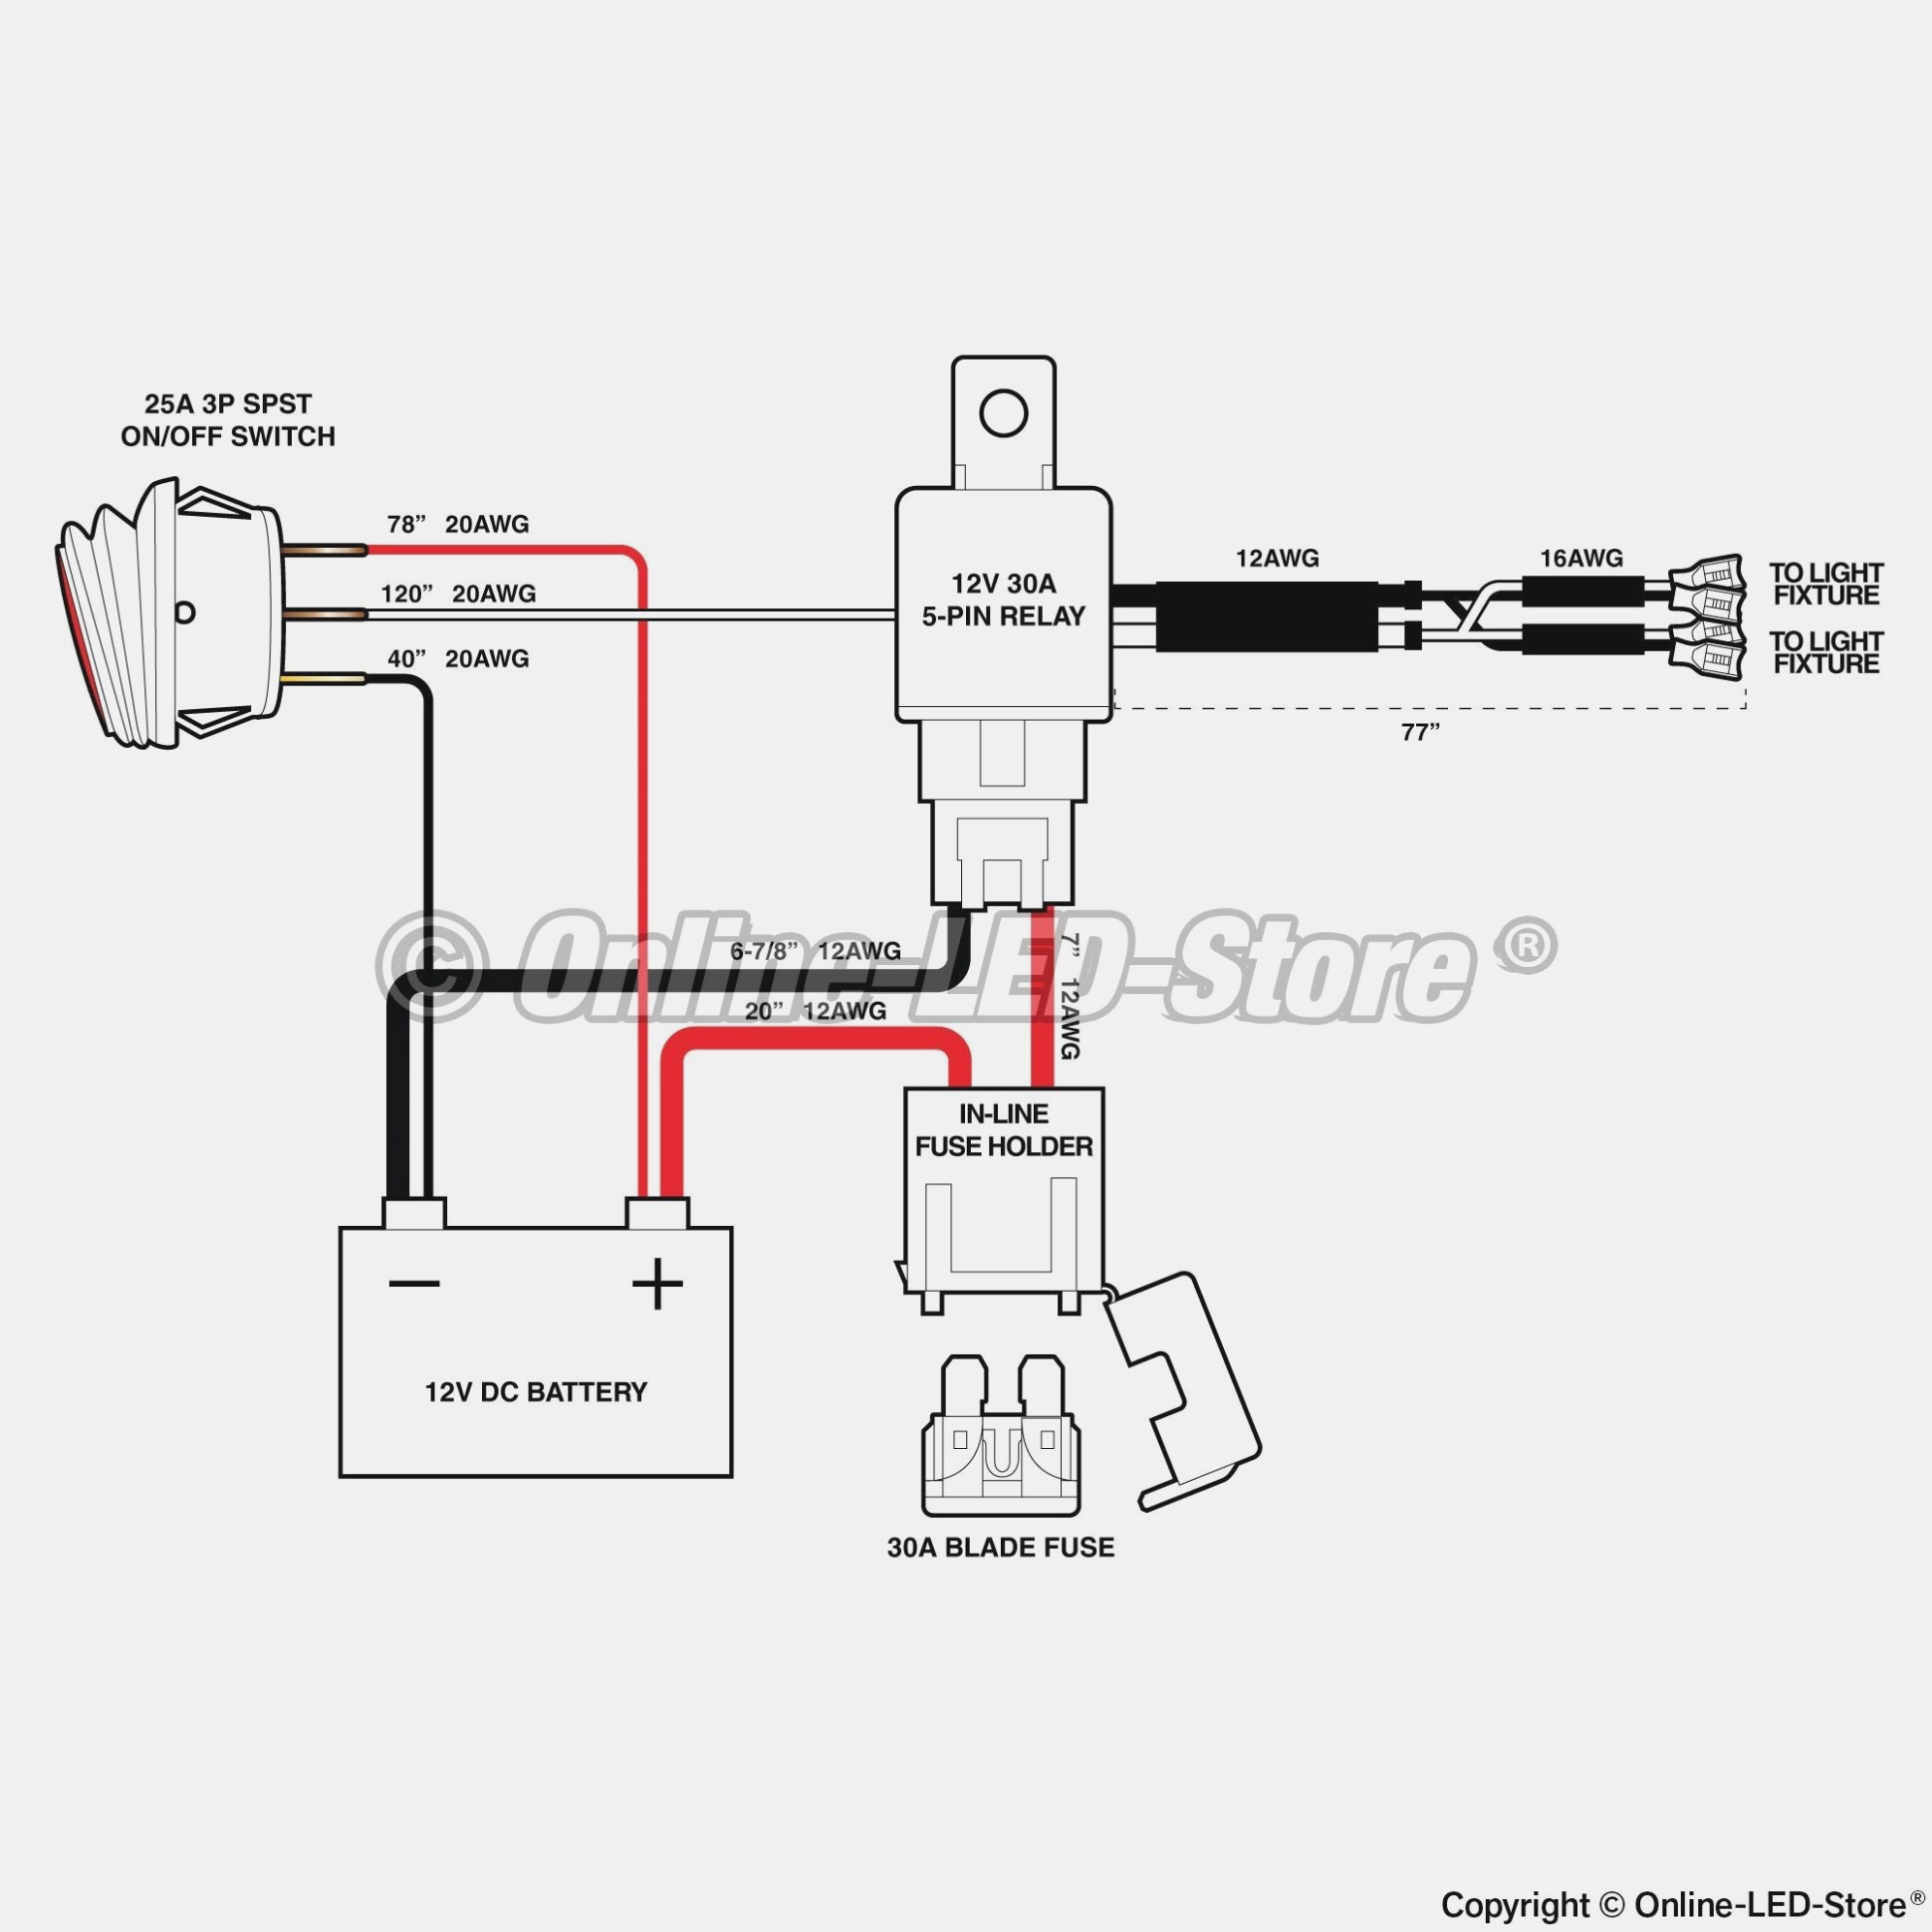 Phone Line Wiring Diagram 12 Volt Led Flasher Circuit 555 Http Wwwcircuitdiagramorg Simple